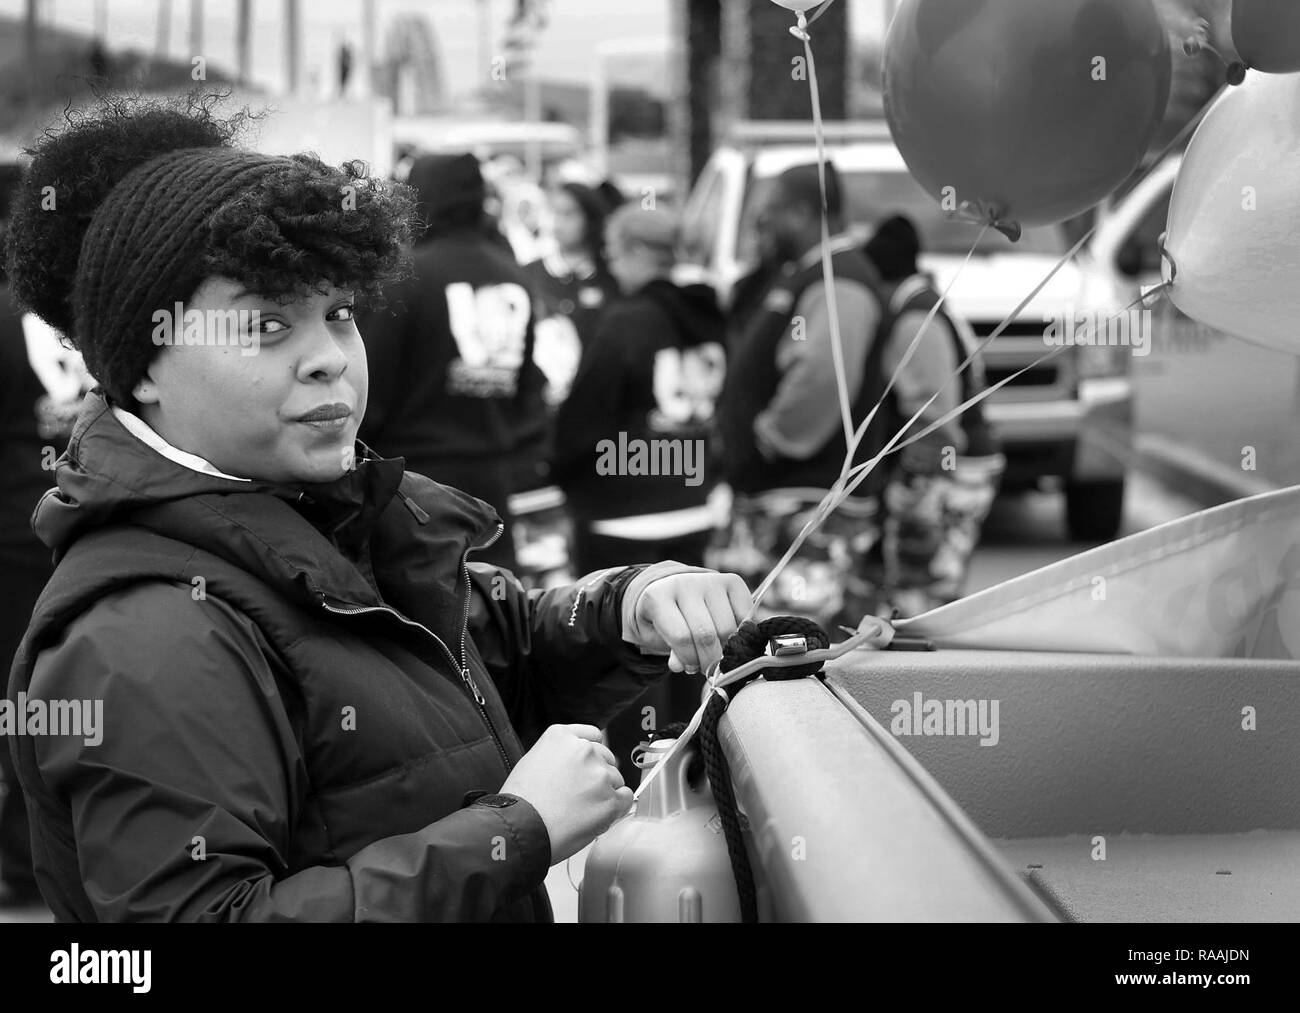 Ms. Jennifer Stewart, architect, Tulsa District, U.S. Army Corps of Engineers, ties balloons onto a boat used by the district during the 38th annual Martin Luther King Jr. Commemorative Parade in Tulsa, Okla., January 16, 2017.   Personnel from the Tulsa District have been participating in the city of Tulsa's MLK Day parade for more than 20 years. Stock Photo